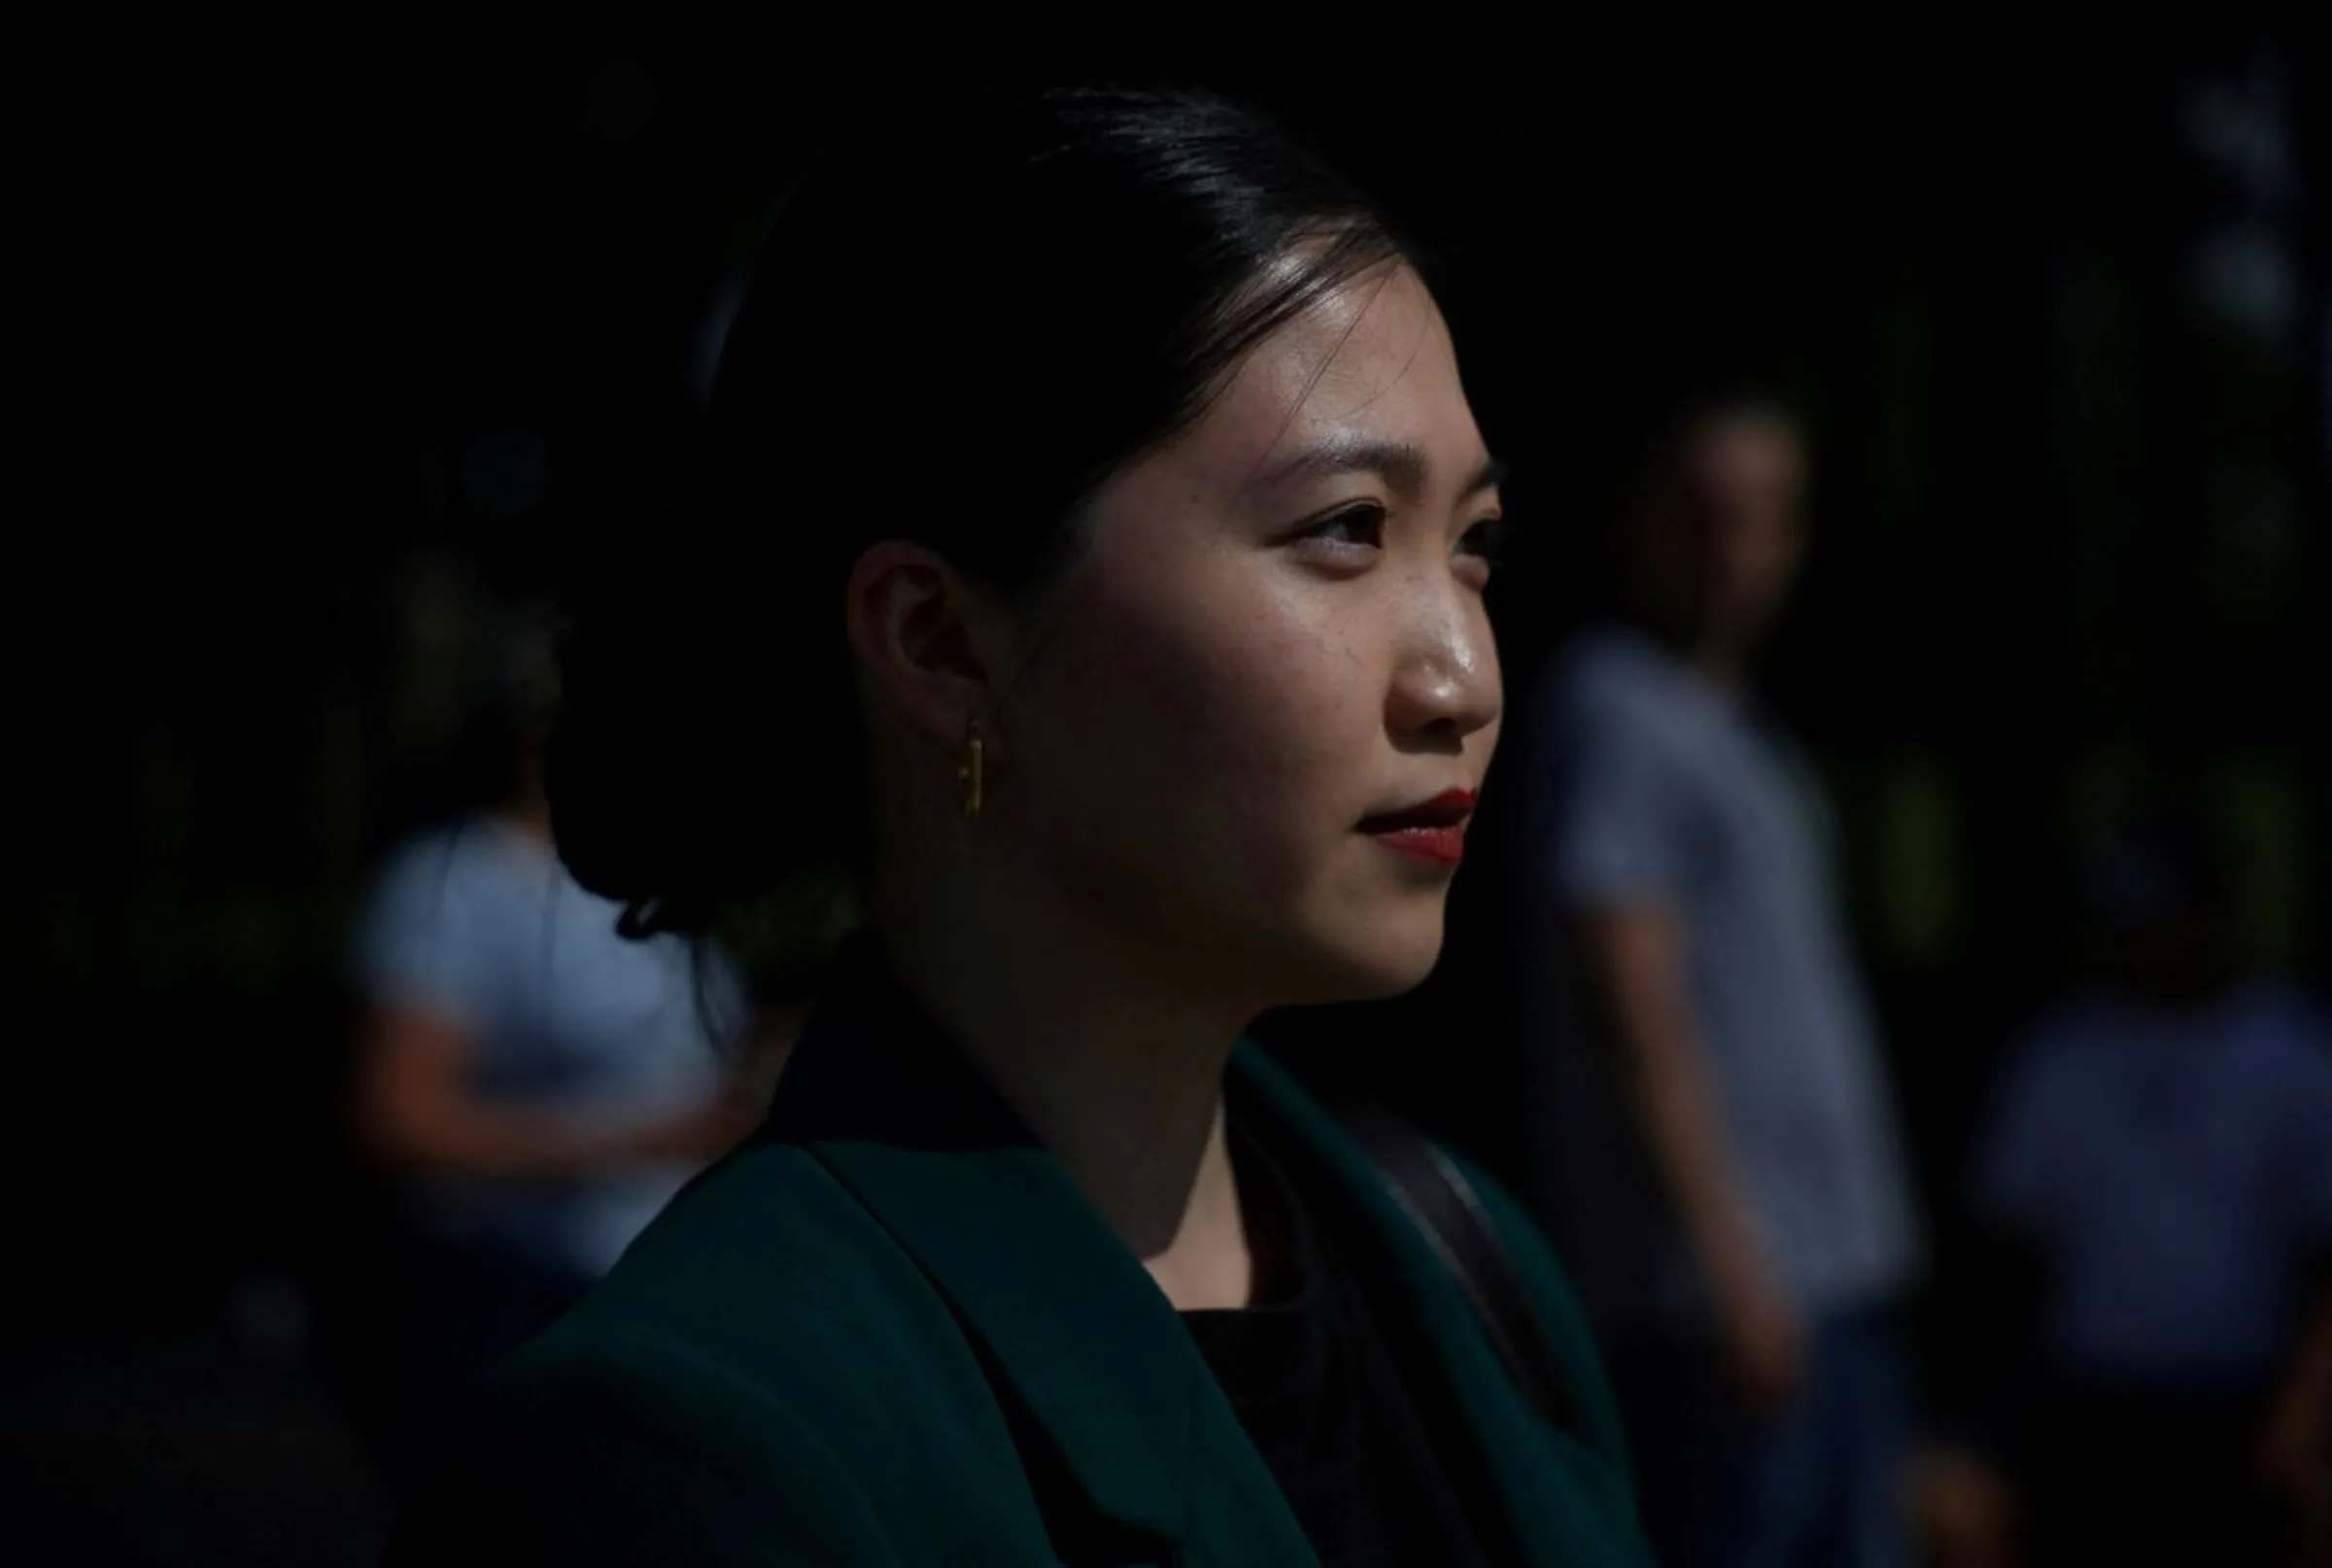 Anna Kwok, 26, a Washington D.C. based Hong Kong activist, who has been designated by the Hong Kong police as a fugitive with a $1 million Hong Kong dollars bounty offered for her arrest, is photographed near the White House in Washington, DC, U.S., July 10, 2023